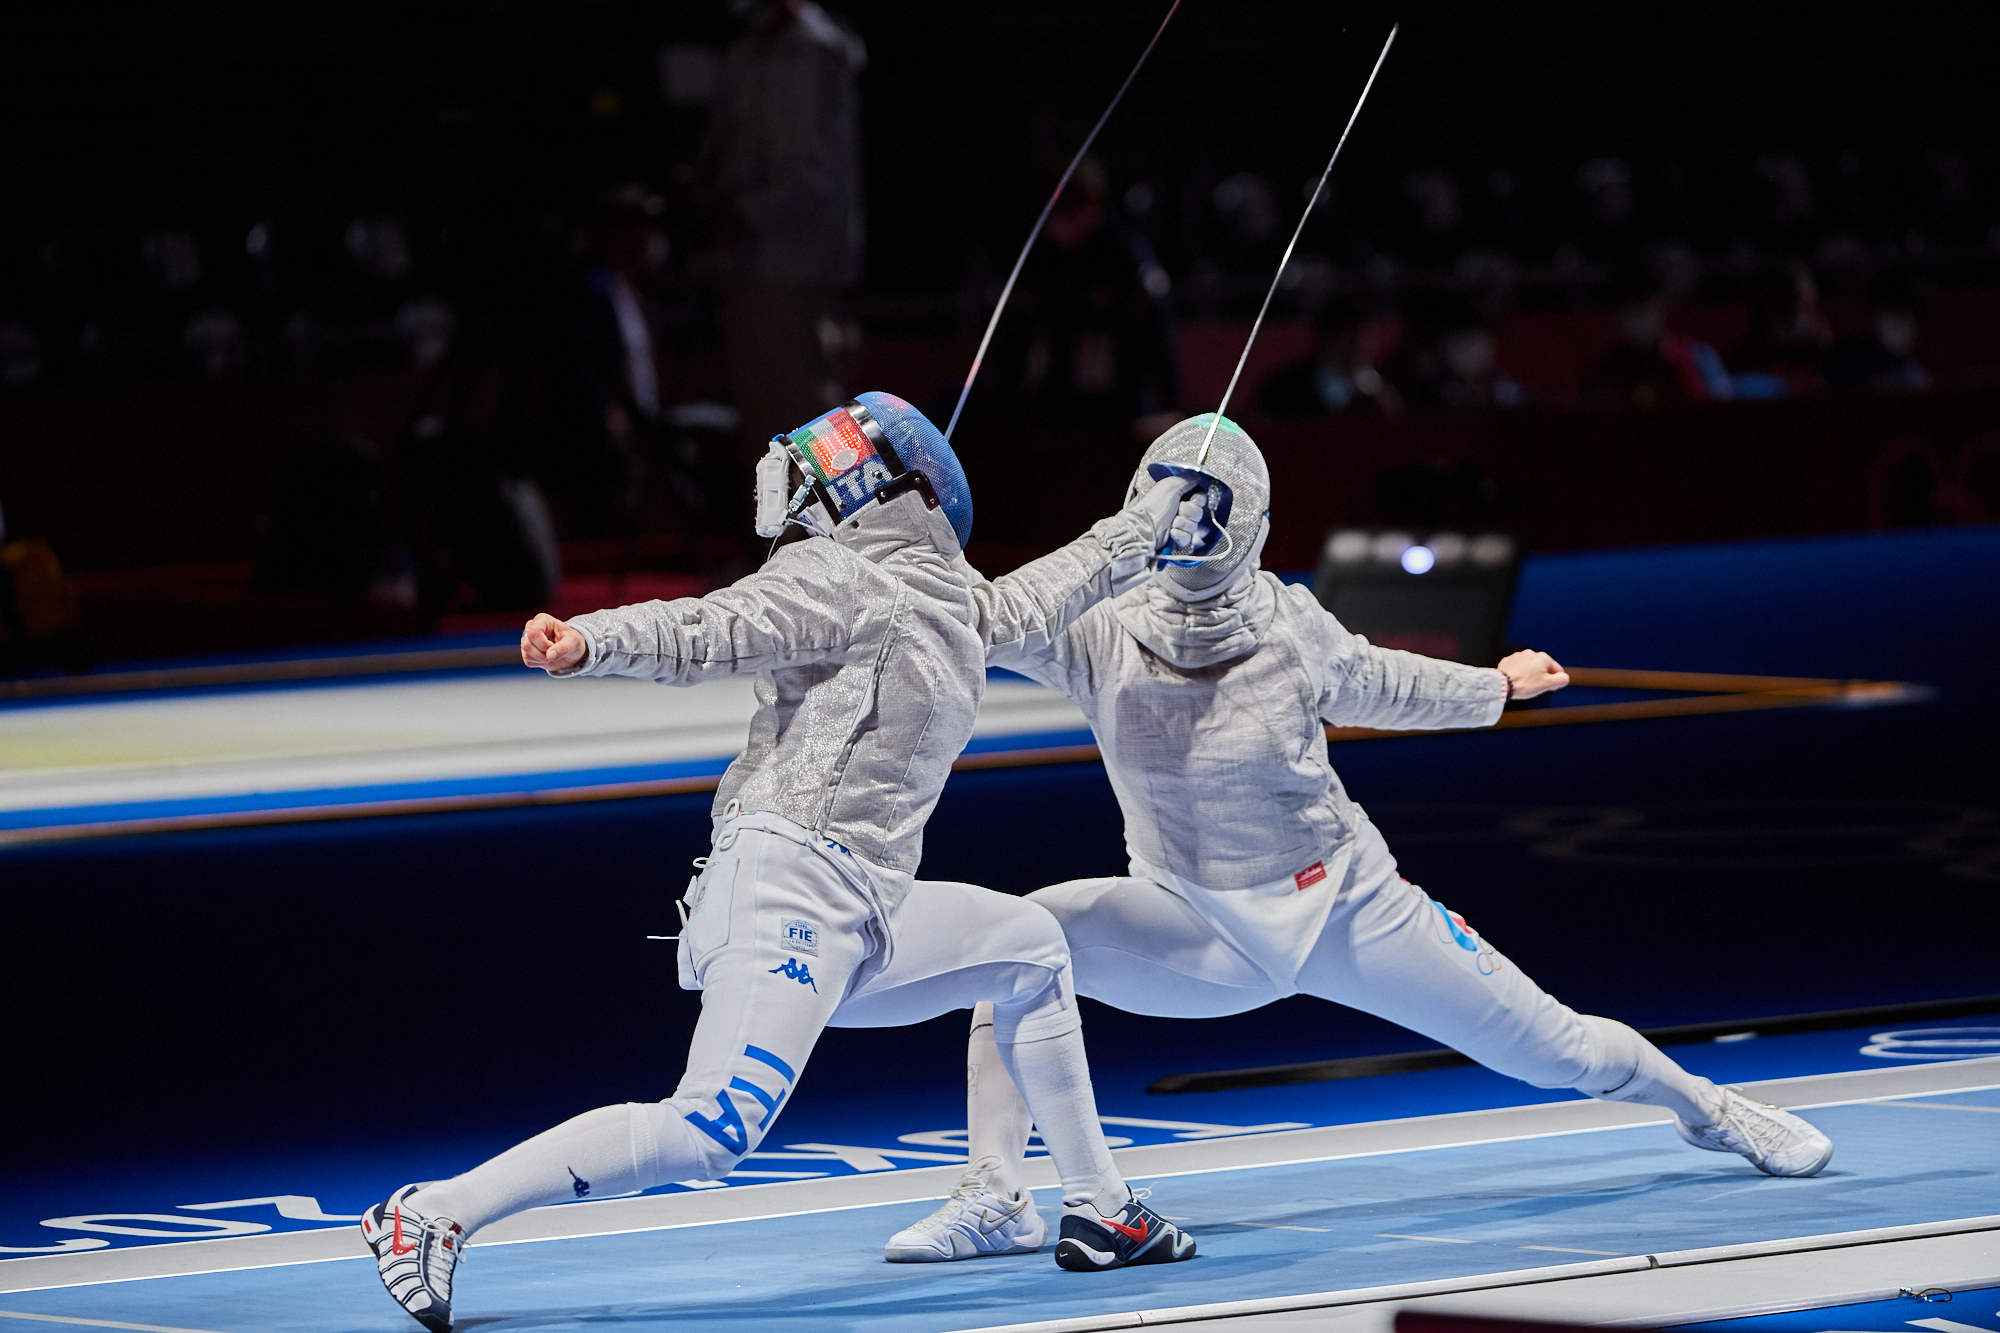 Photo of fencing competition during the Tokyo 2020 Games.